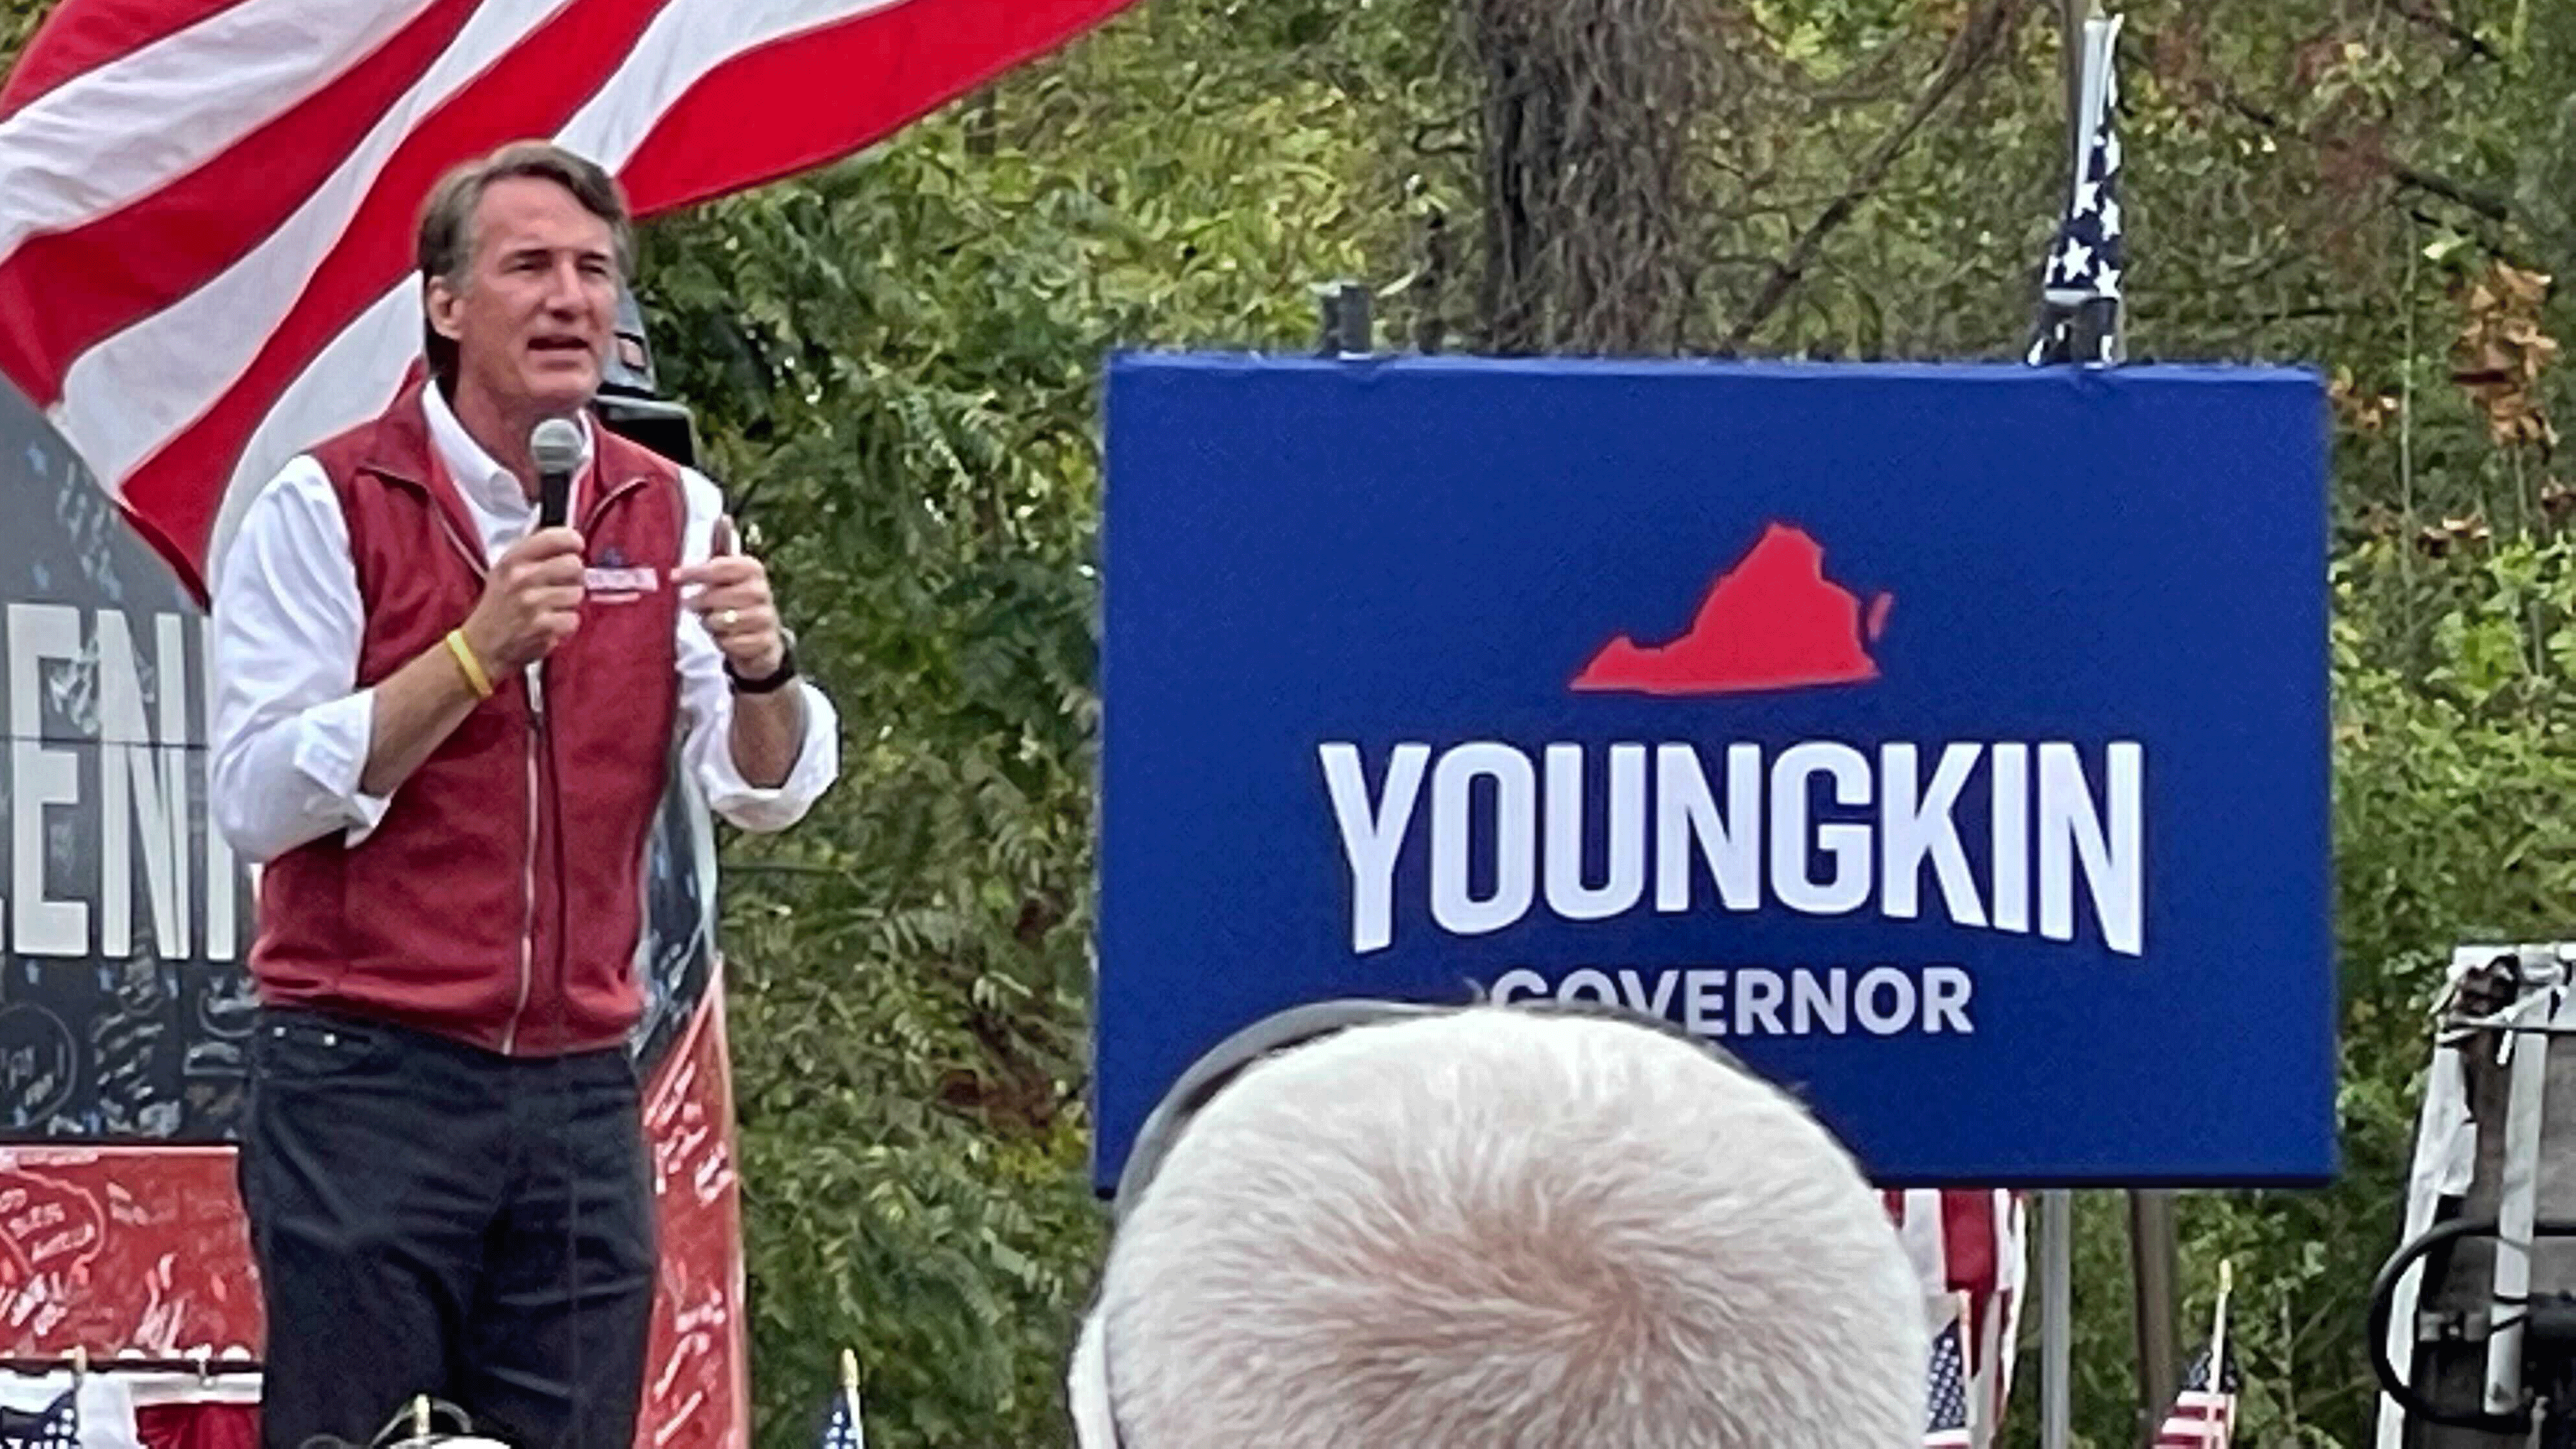 Virginia Republican gubernatorial candidate Glenn Youngkin holds a campaign event in Amherst, Va., October 28, 2021 (Charles Creitz/Fox News)